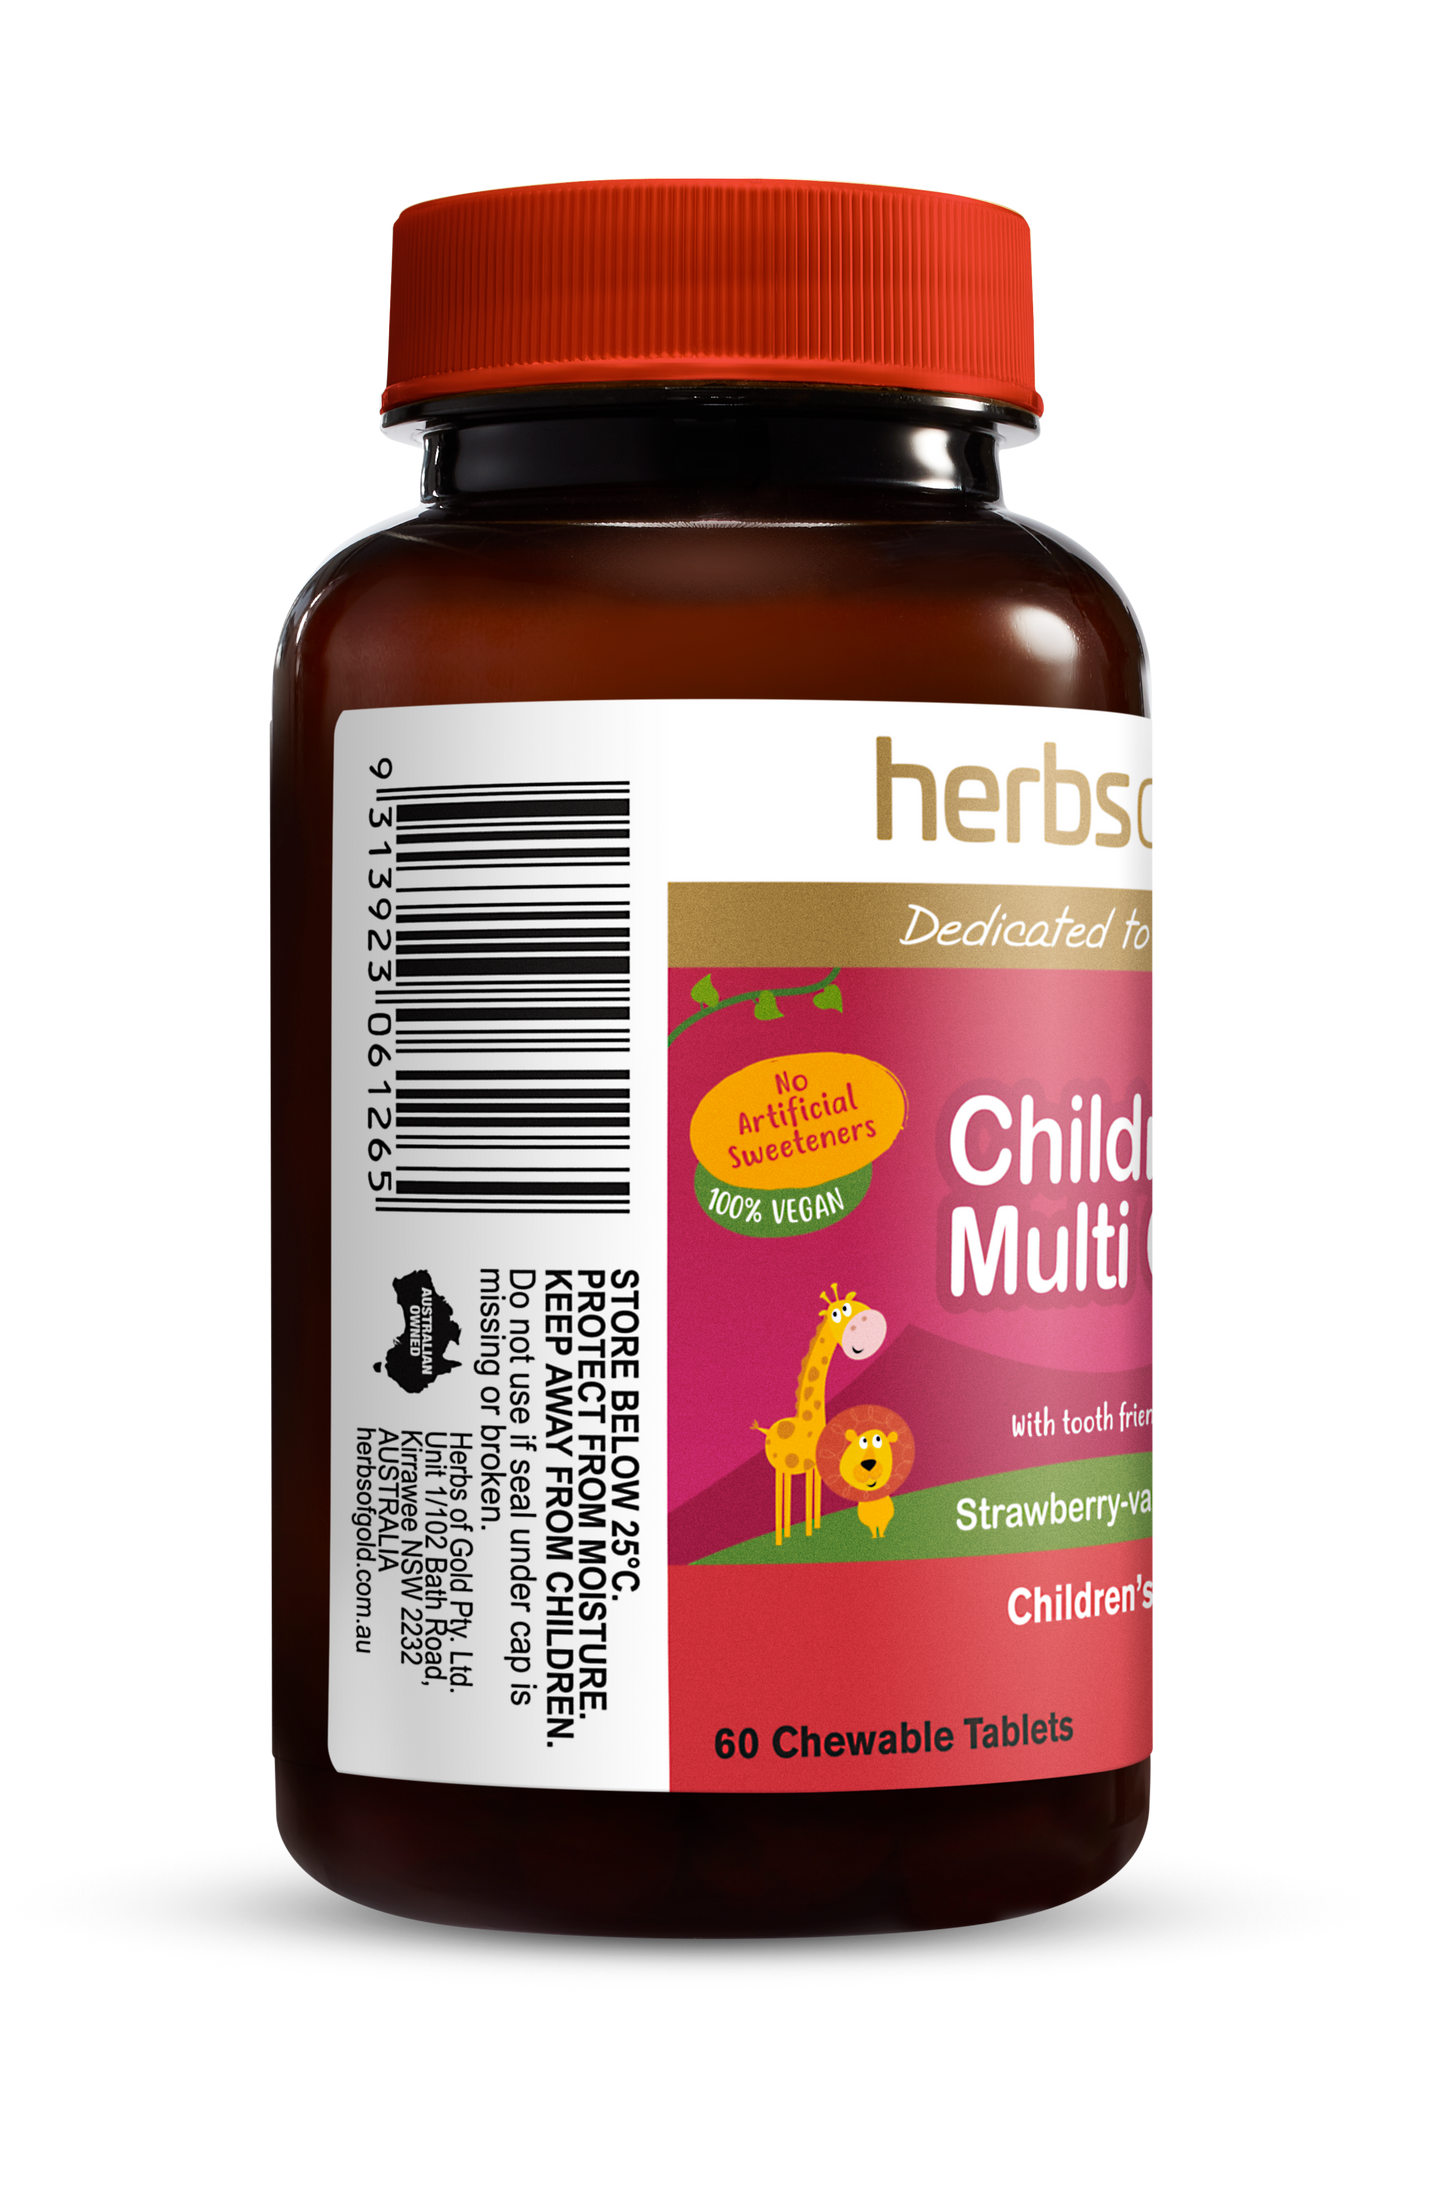 Herbs Of Gold Children's Multi Care 60 Chewable Tablets